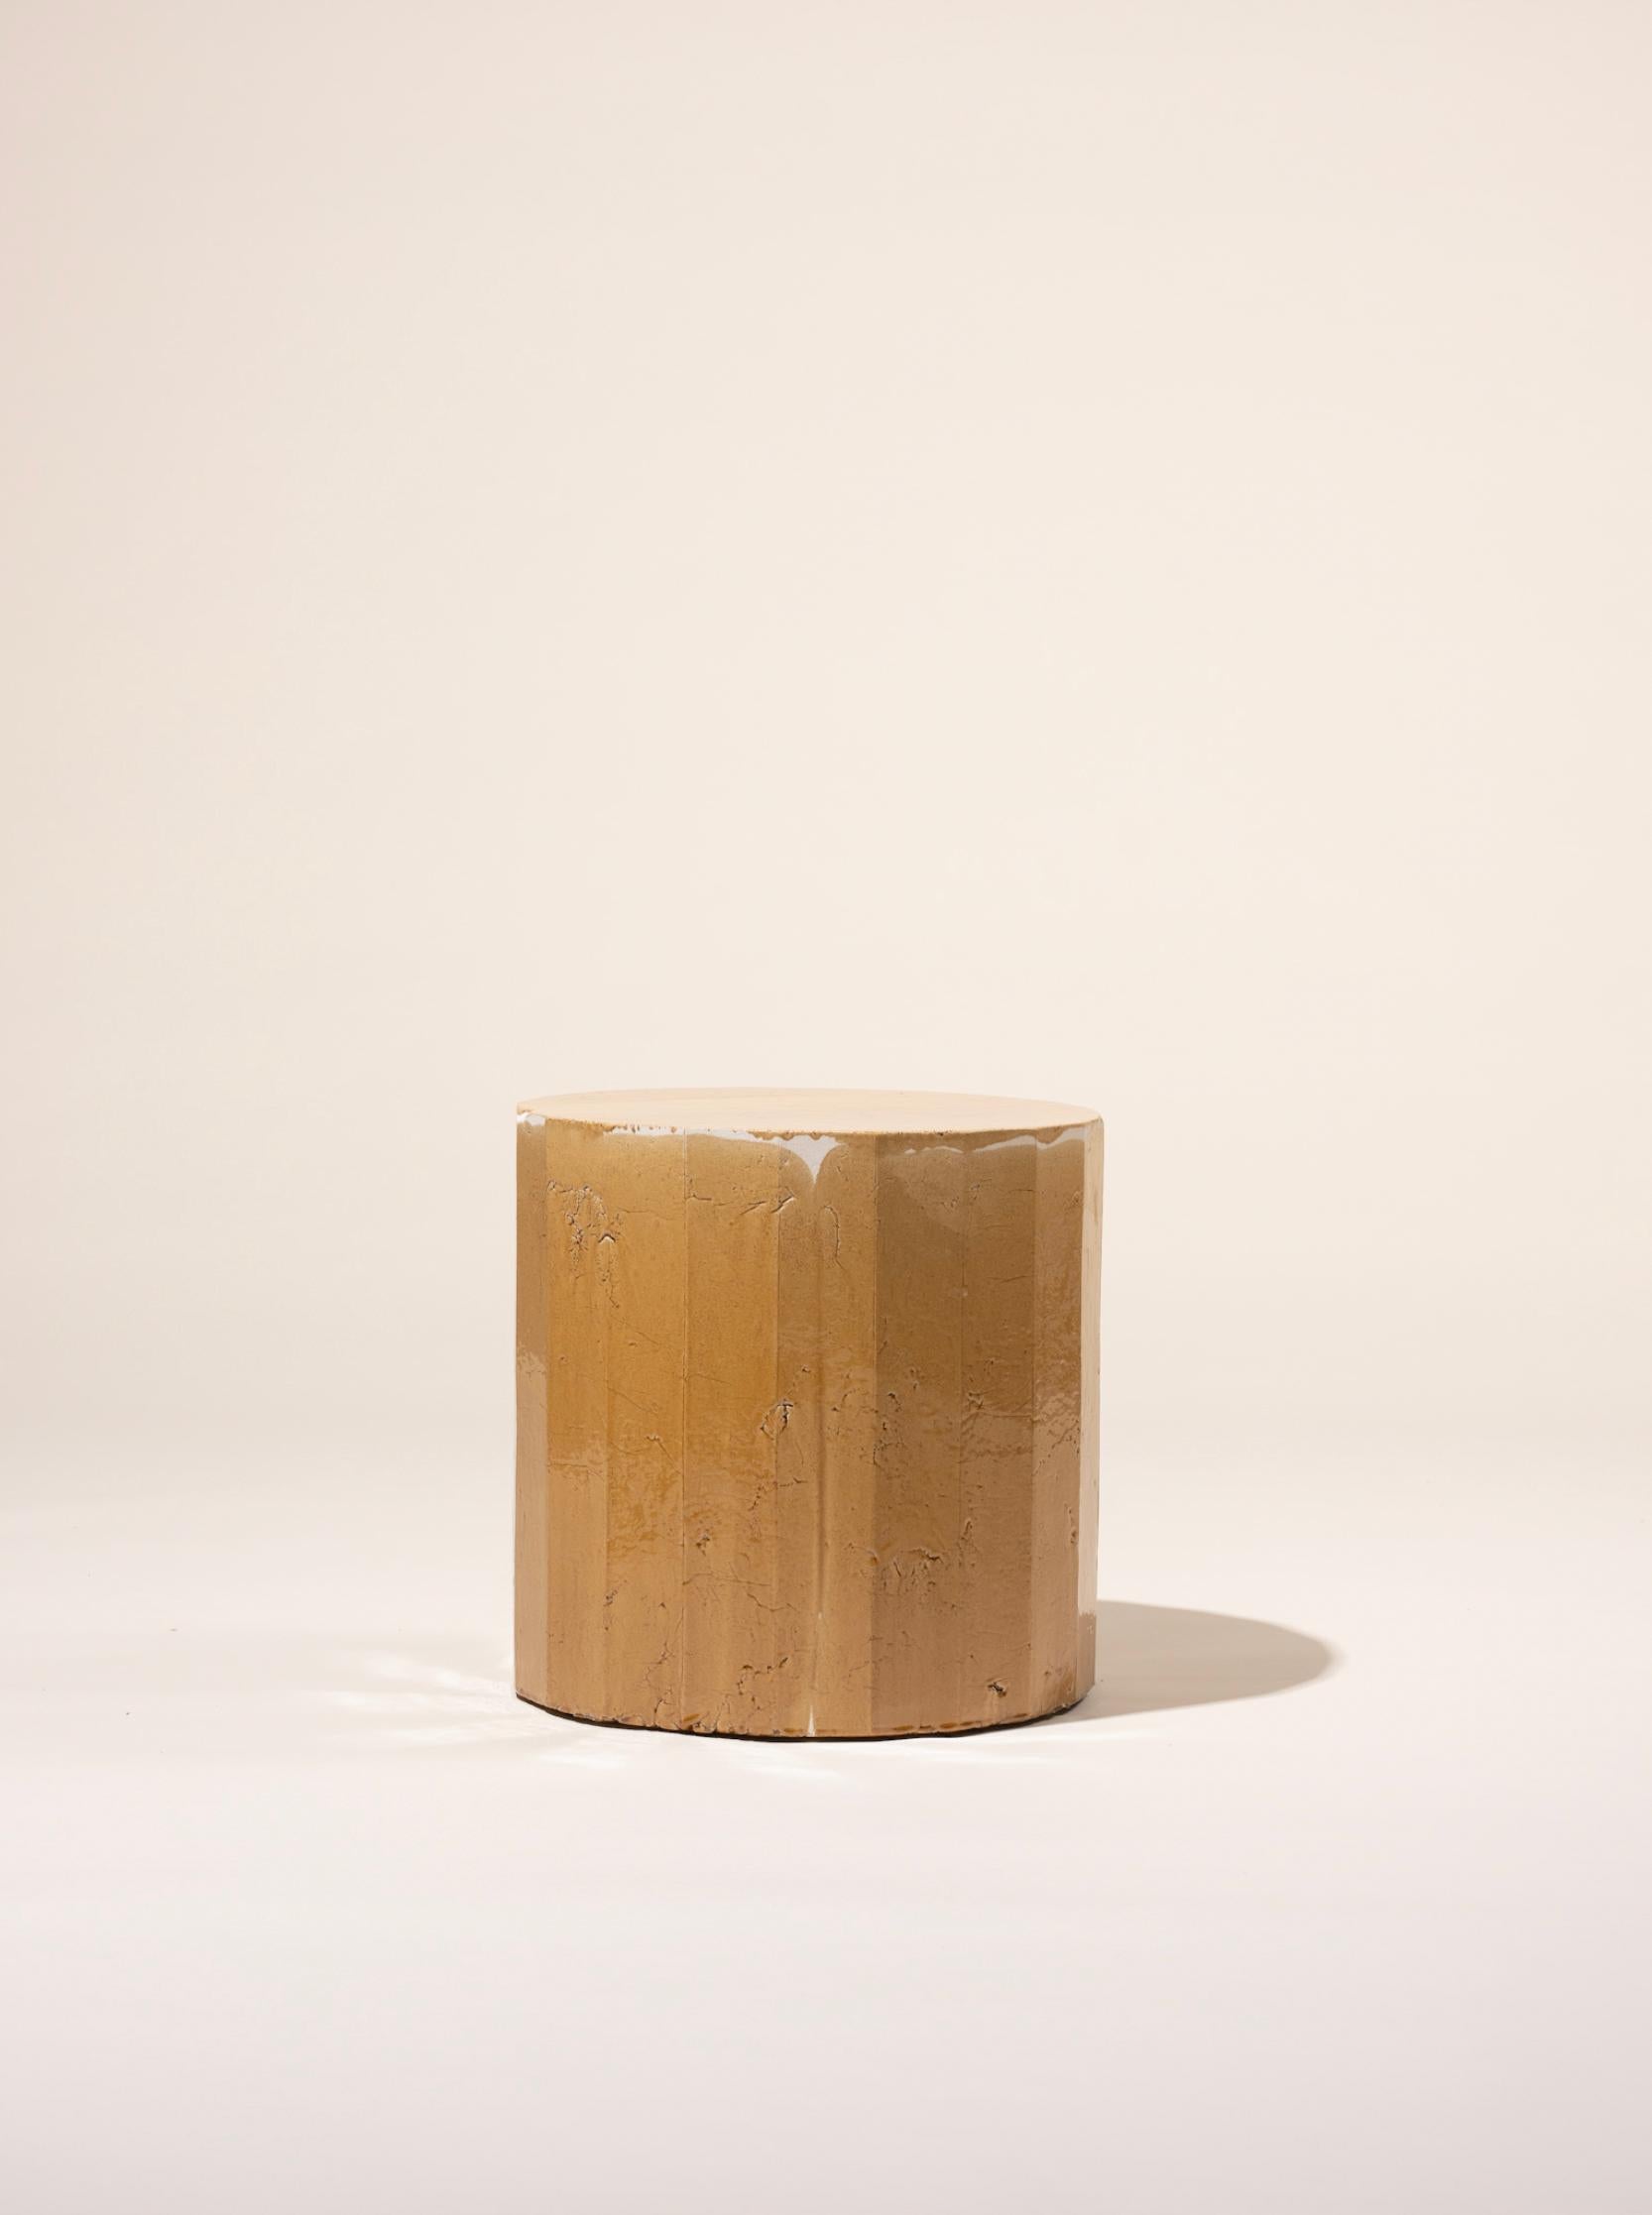 Handcasted and facetated stoneware side table manufactured at the workshop of Apparatu in Barcelona. Different clay bodys are mixed with natural fibers like corn, straw, or heather straw. The pieces are casted by hand, creating a thick and strong